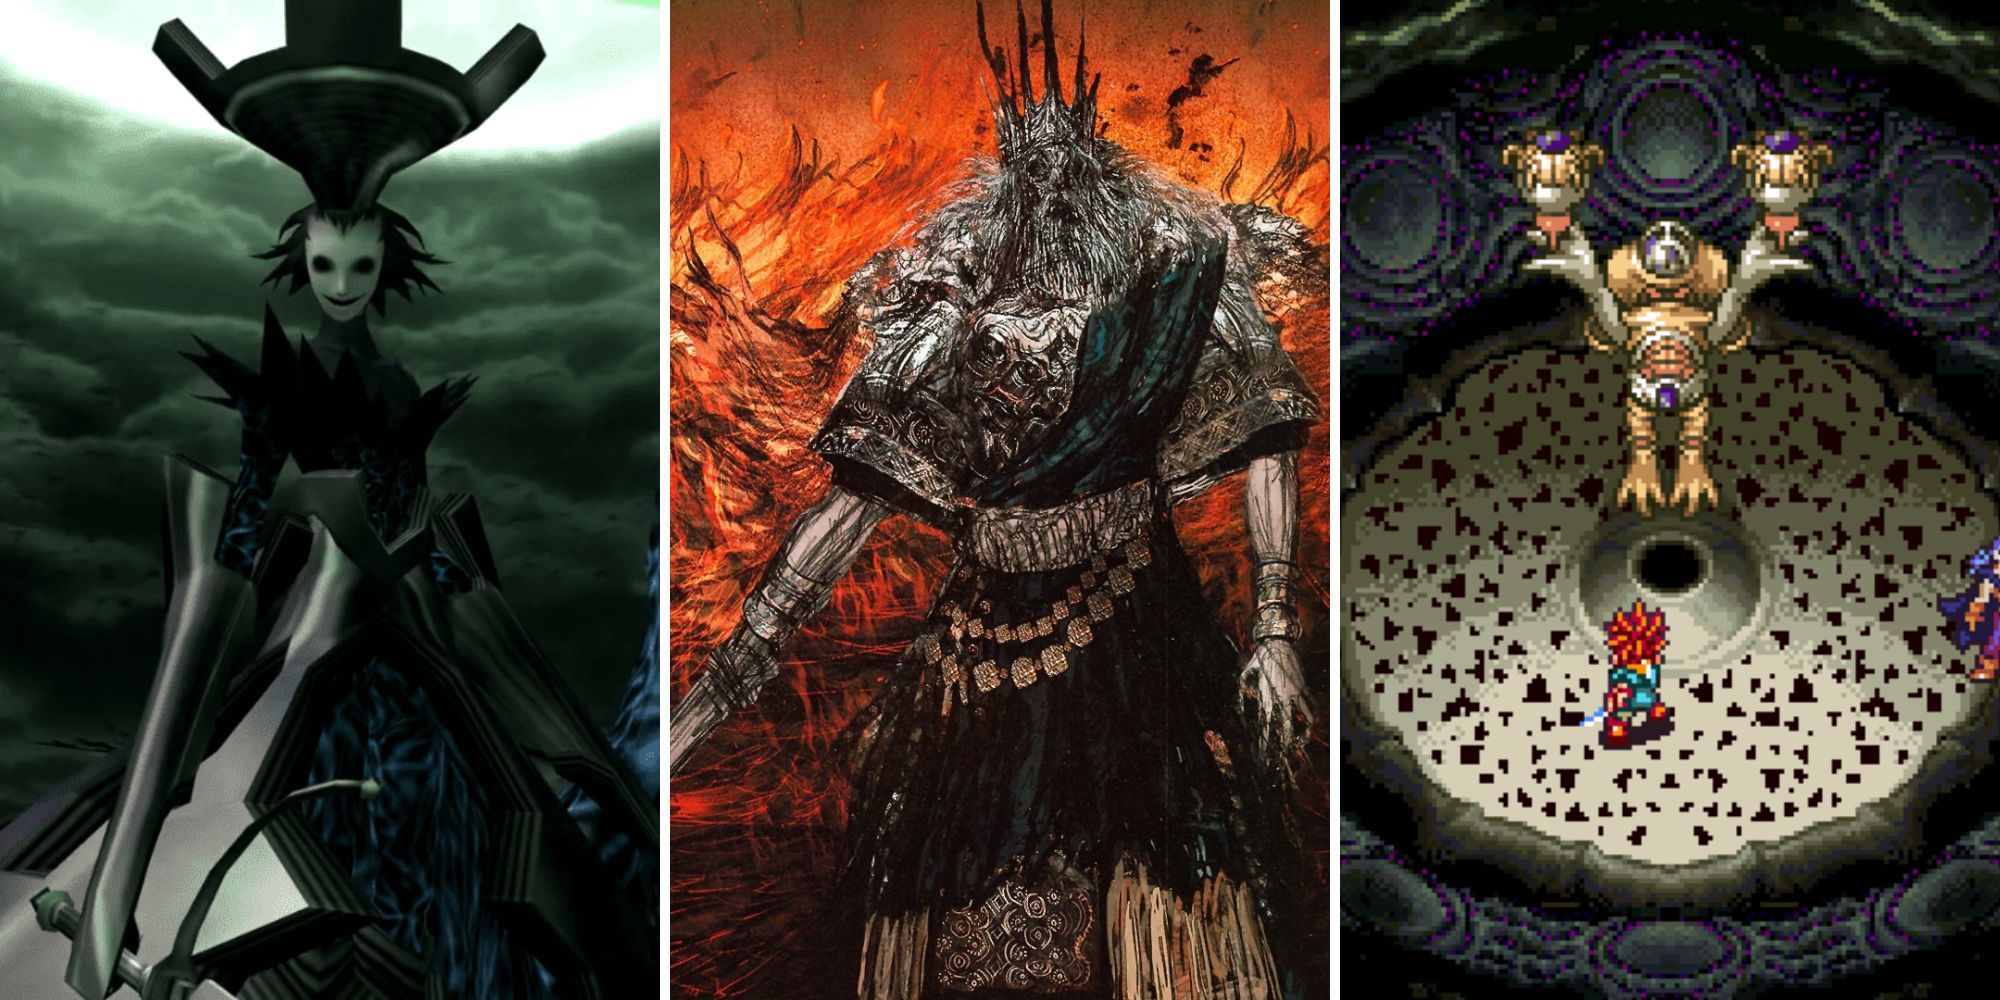 Collage of Best RPG Boss Fights (Nyx, Gwyn Lord of Cinder, Lavos)